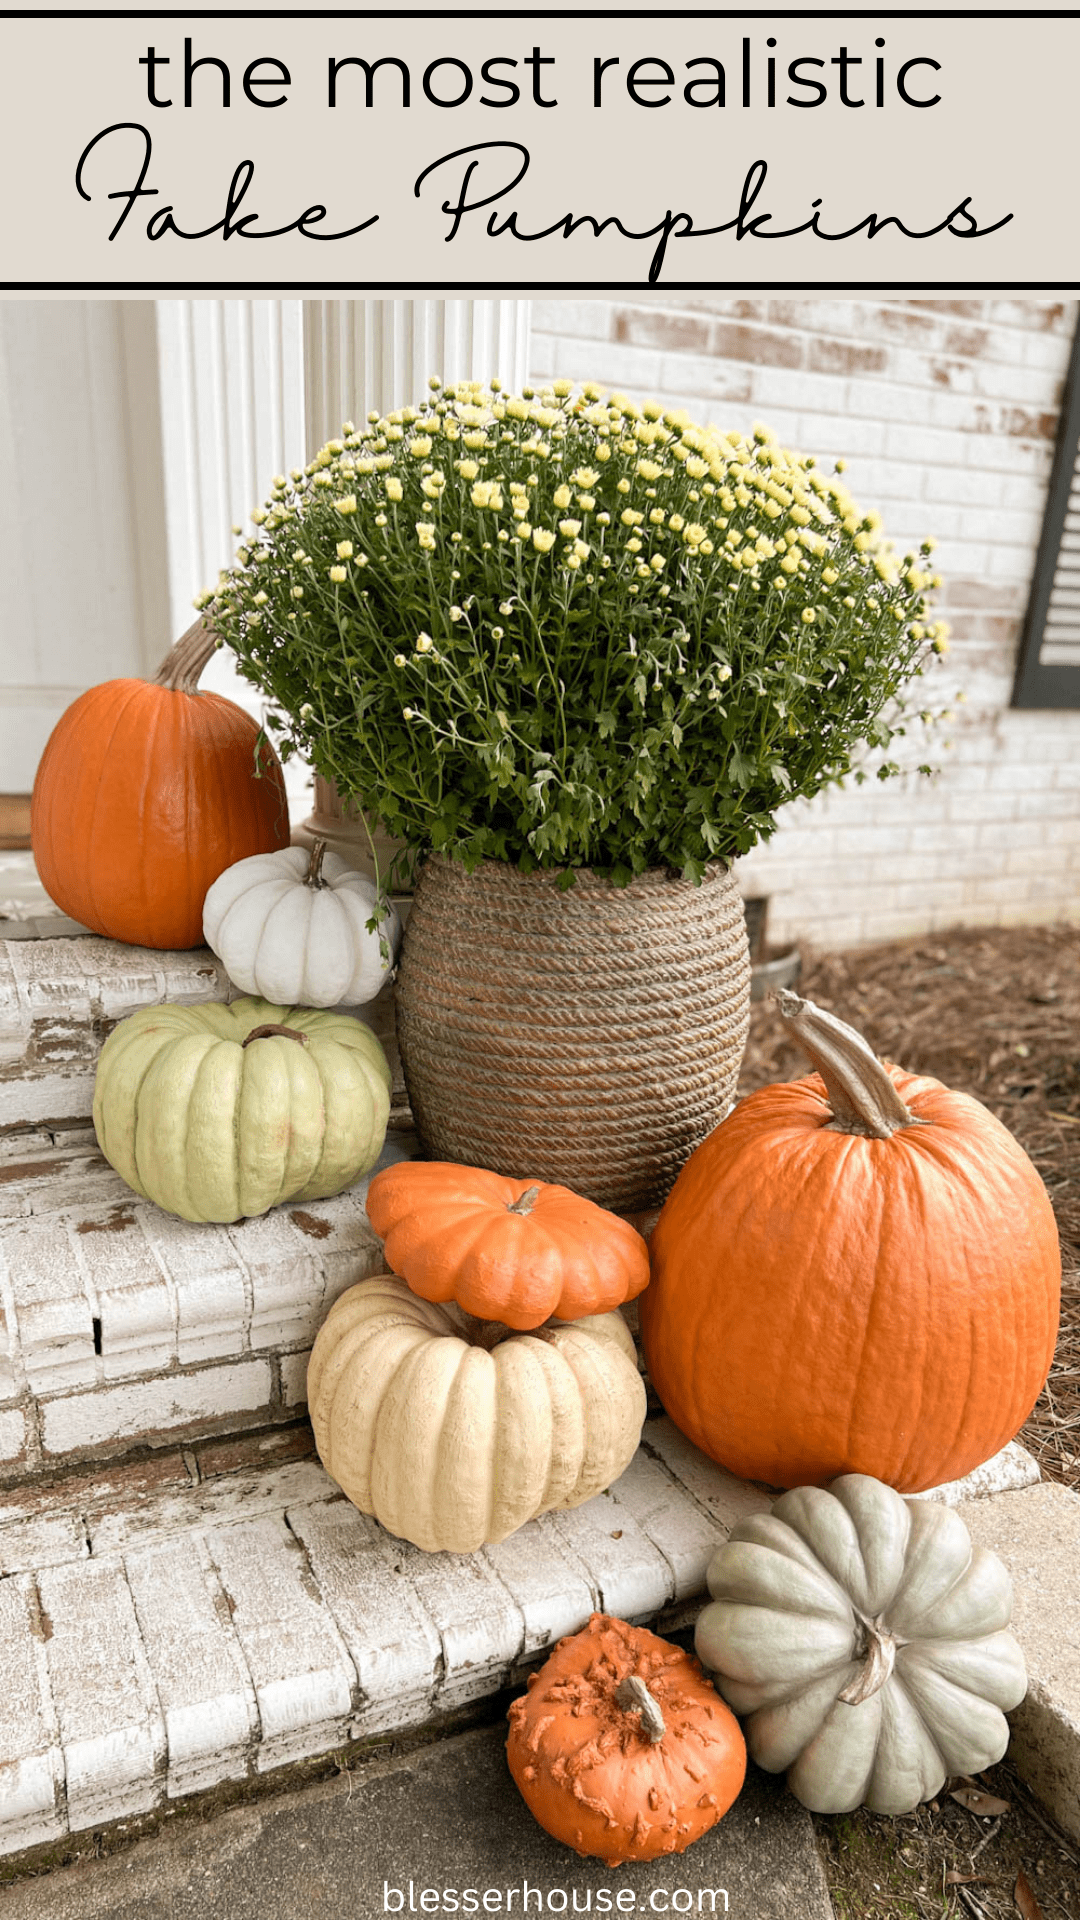 planter of mums and realistic pumpkins on porch